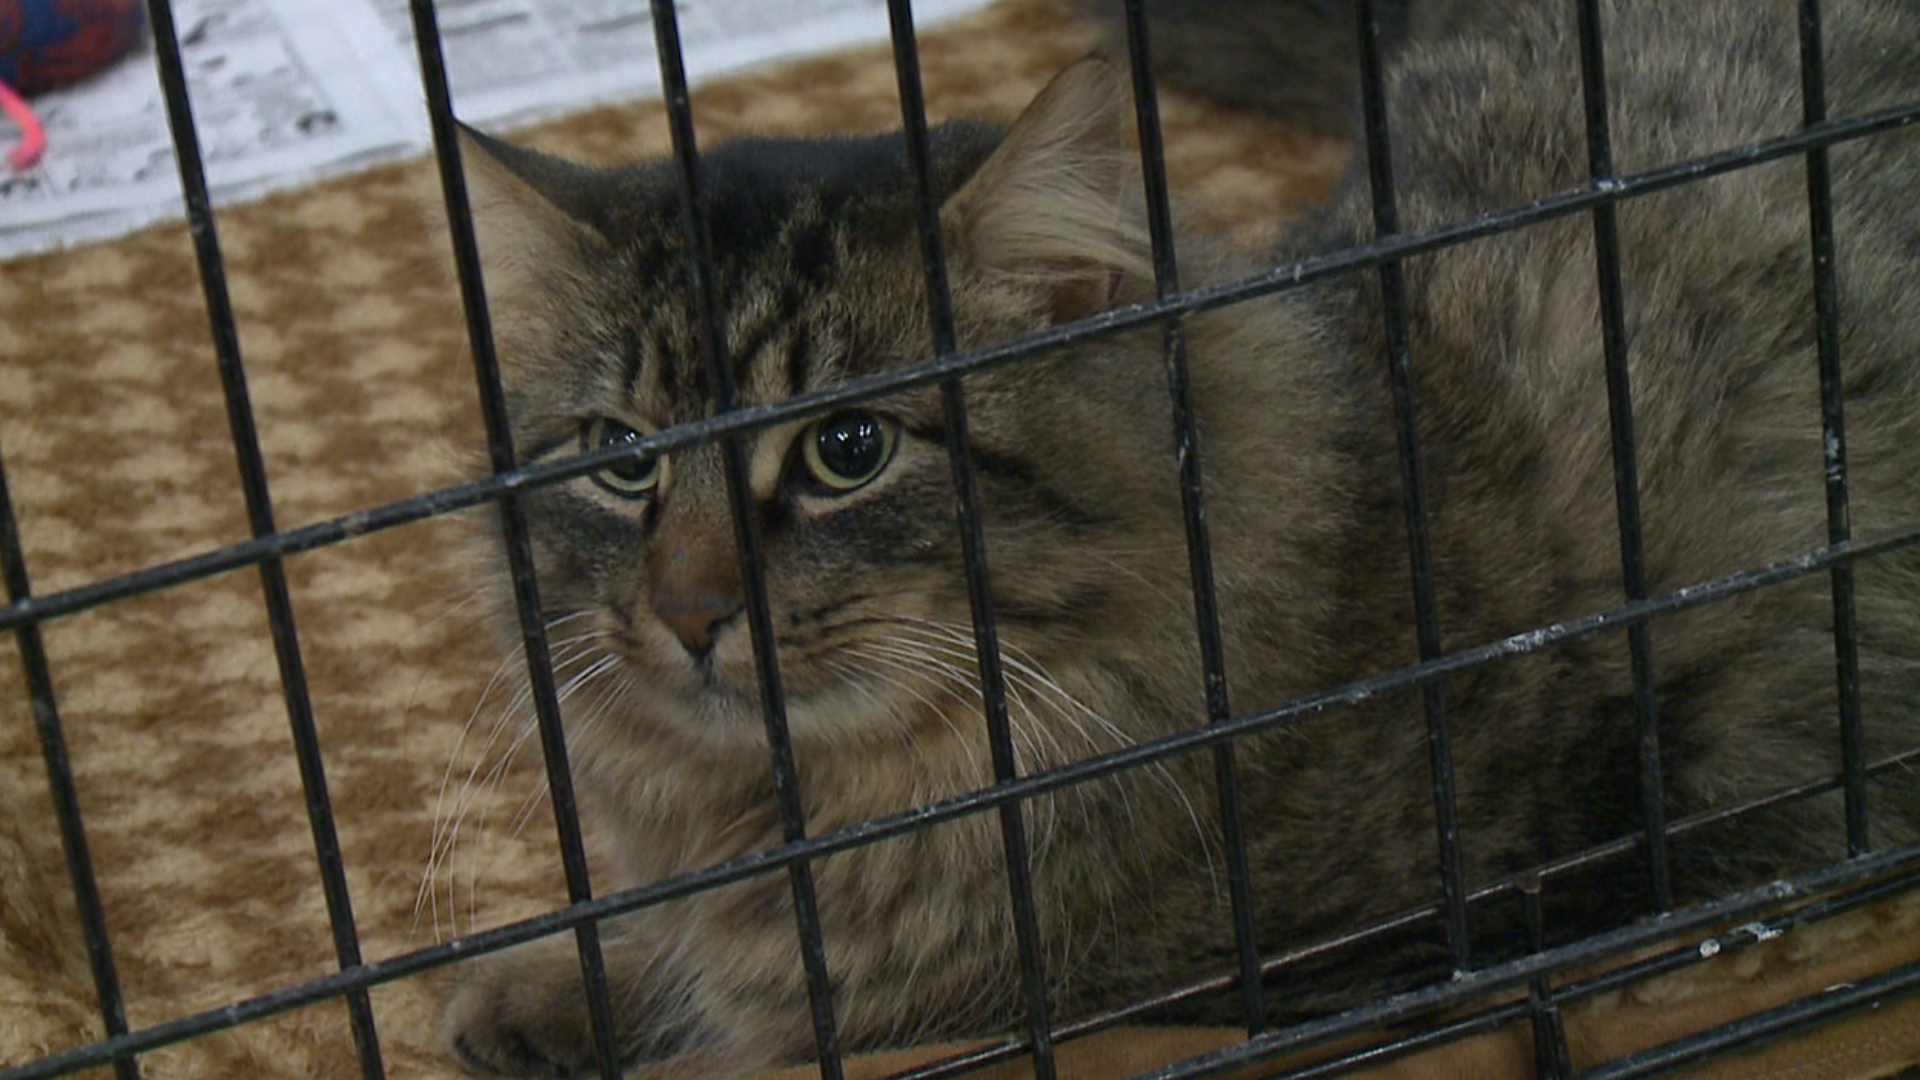 A local organization held an adoption event for Valentine's Day.